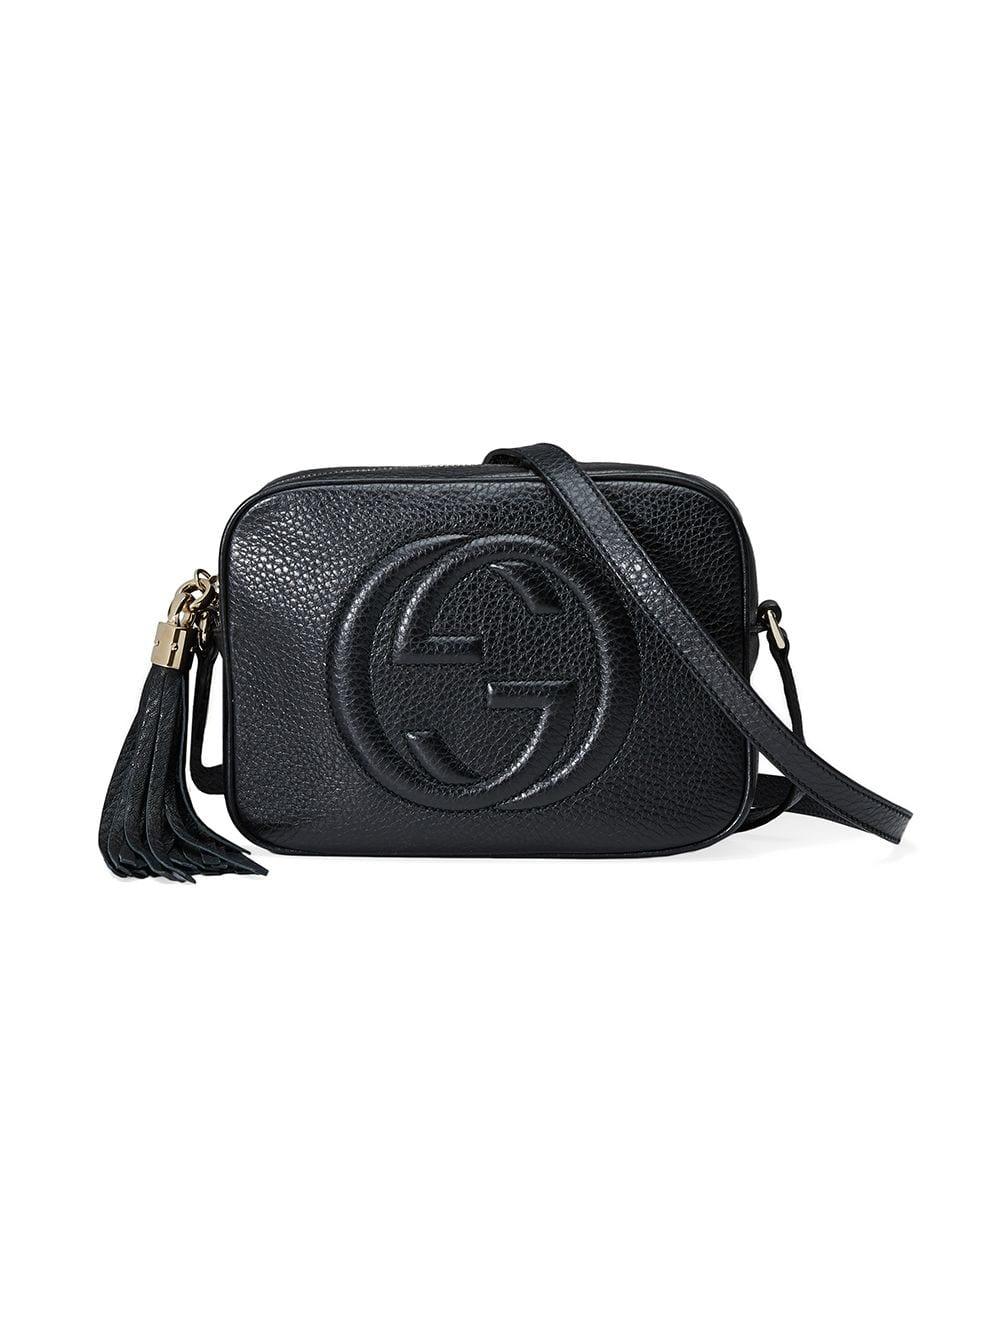 Gucci Soho Small Leather Disco Bag in Black - Save 19% - Lyst